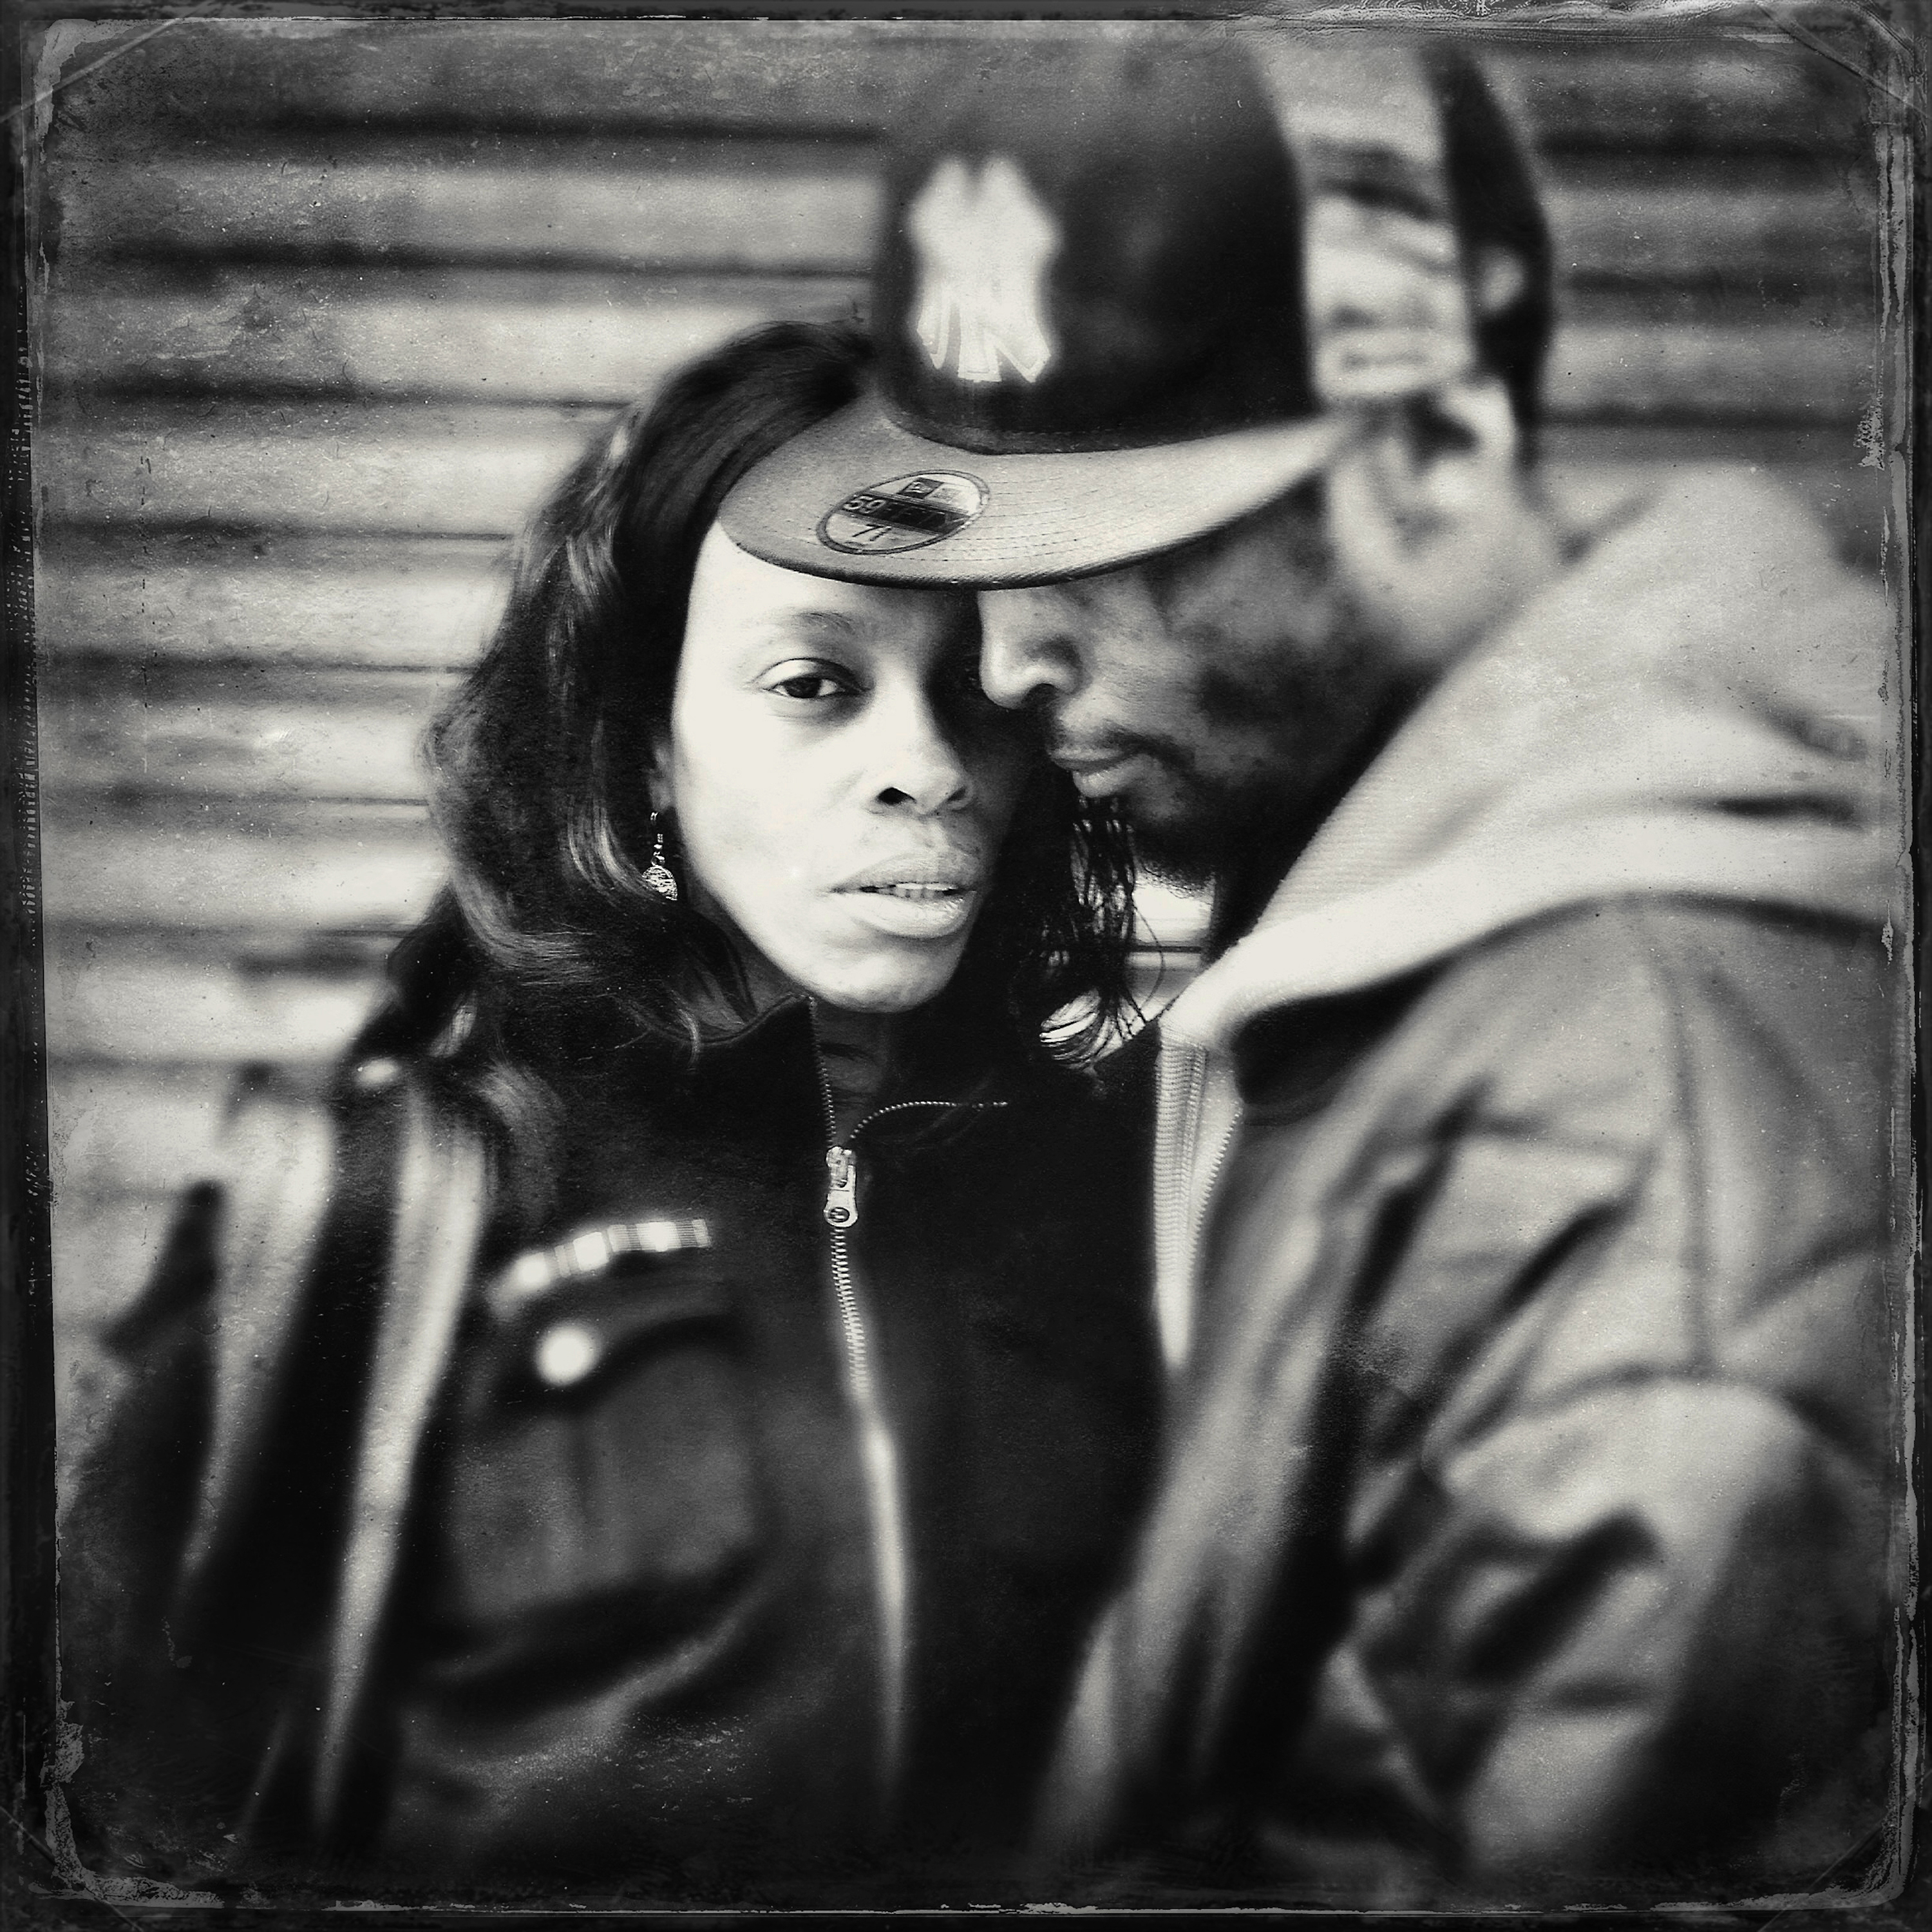 Mar. 31, 2013. Mike and Diane: Today Mike went to hustle the streets before meeting up with his woman. He found two speakers on the sidewalk and brought them to the bodega to sell them. The money he will use for a nice dinner for him and Diane.